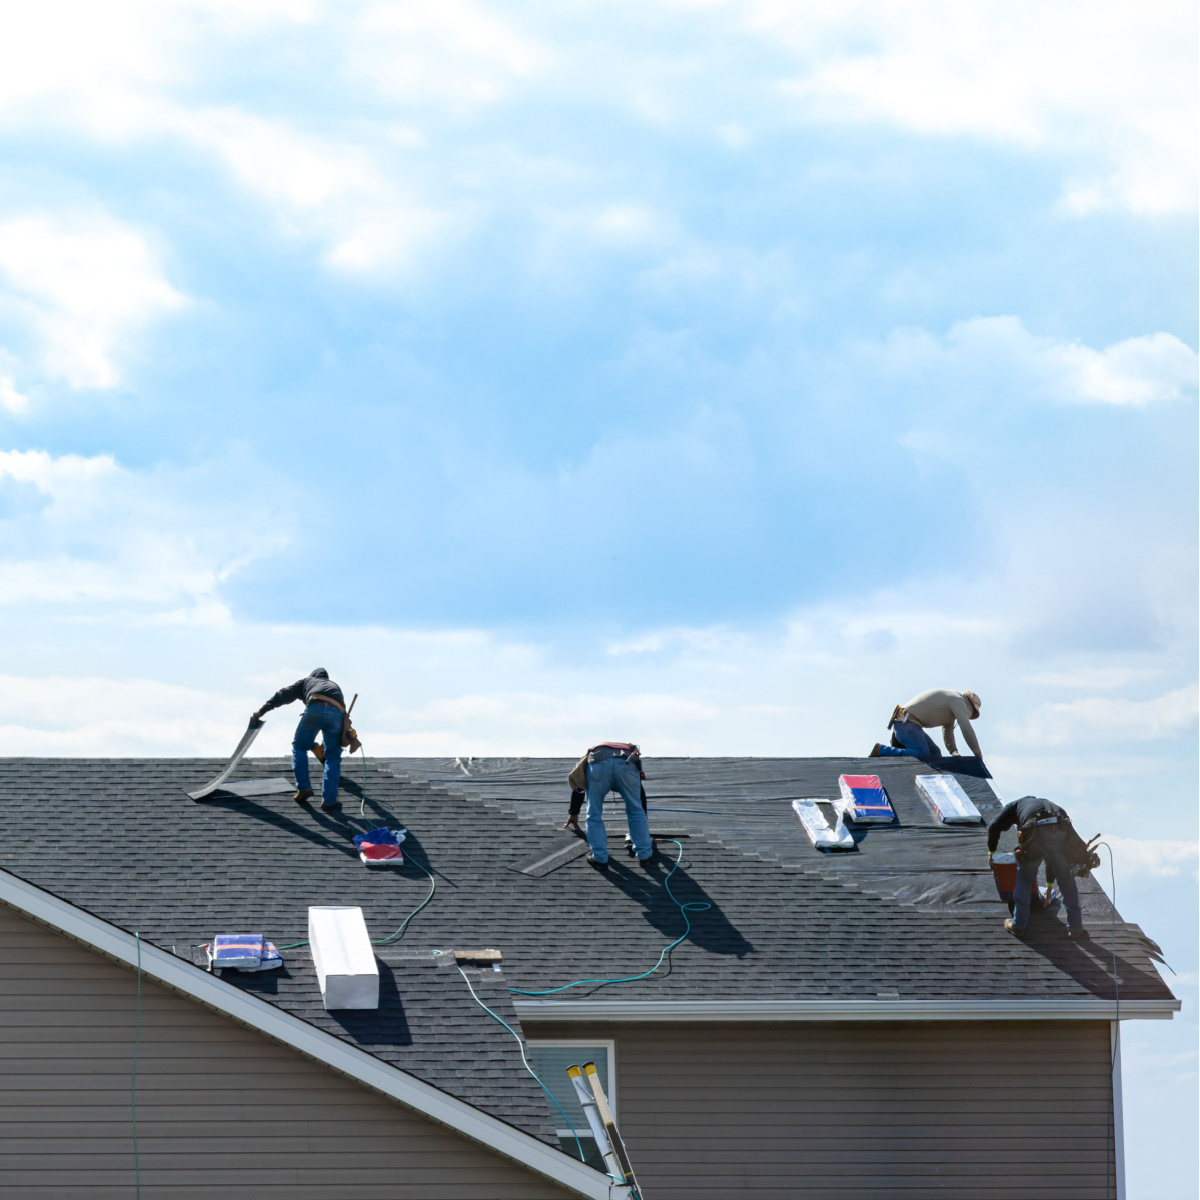 Does Your Meadows Place Roof Need Repair? Here's How to Tell